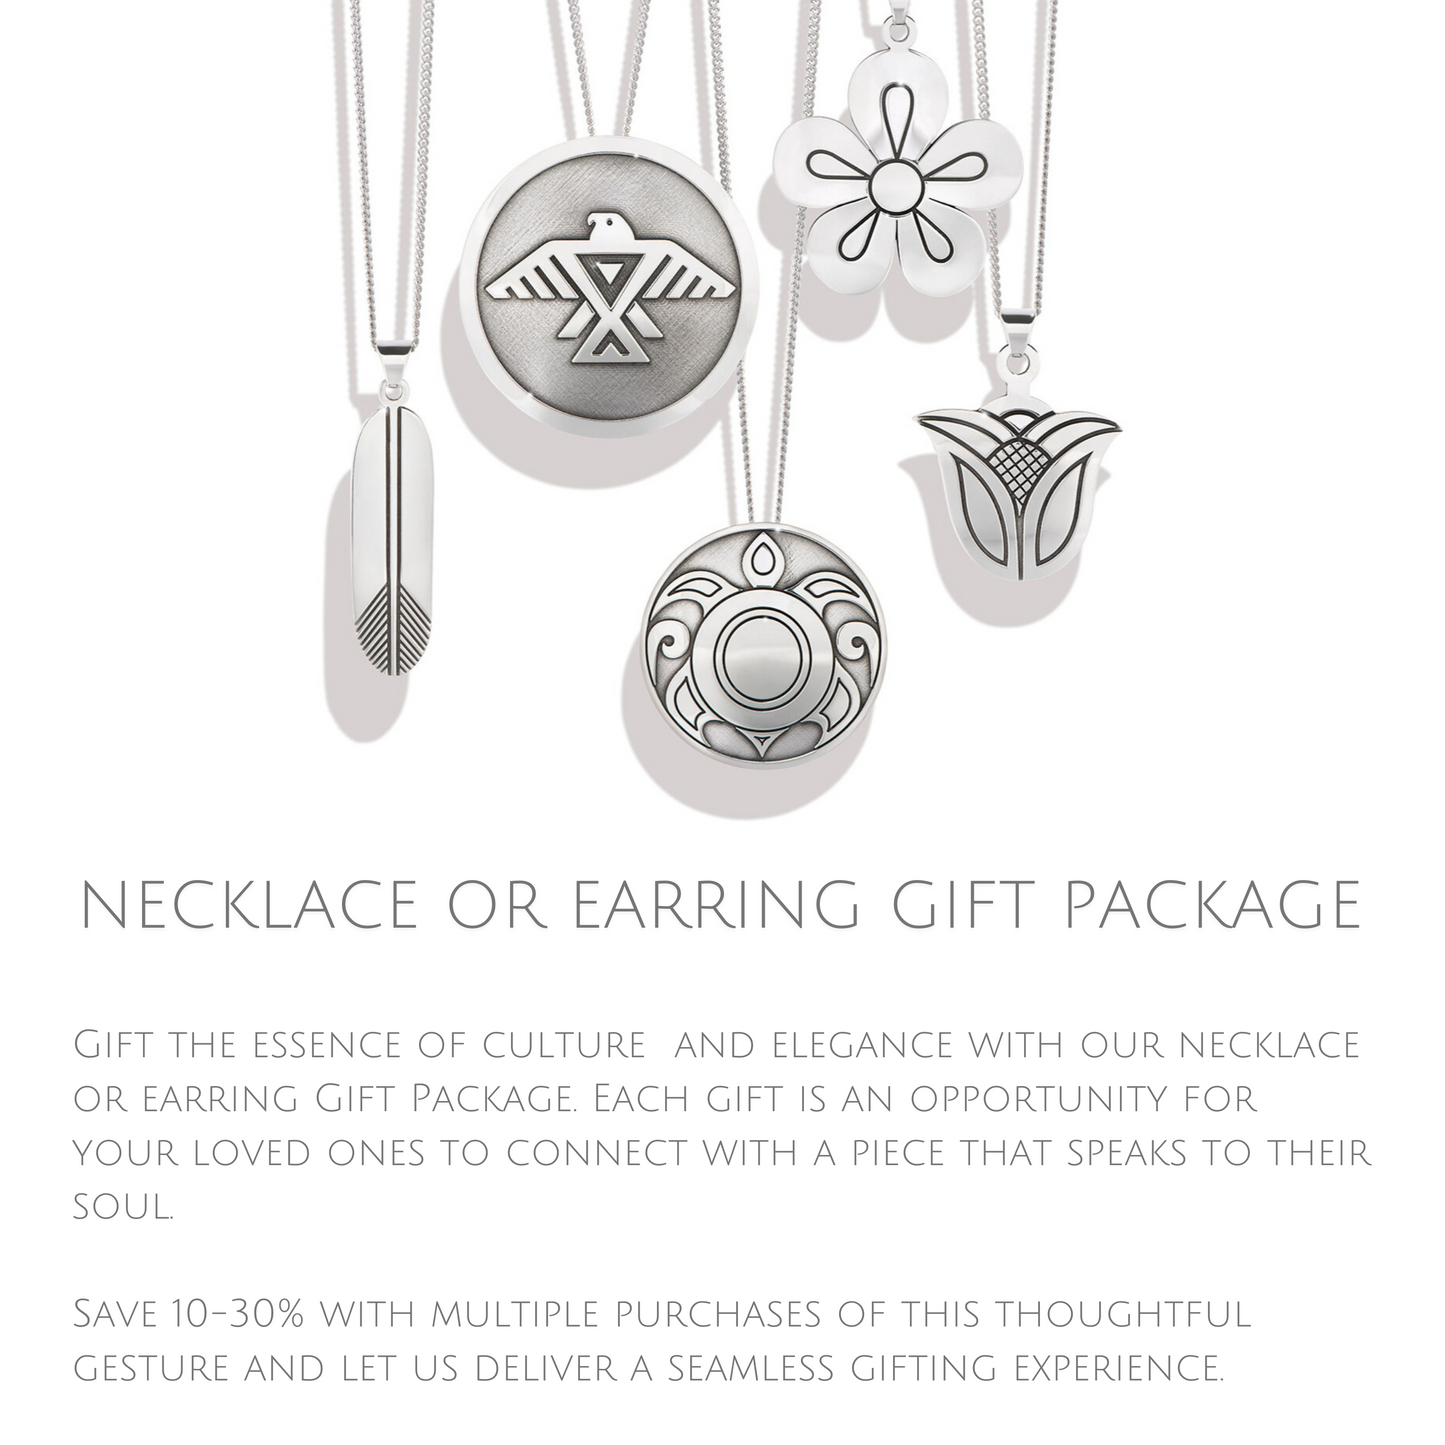 Our Necklace Or Earring Gift Package